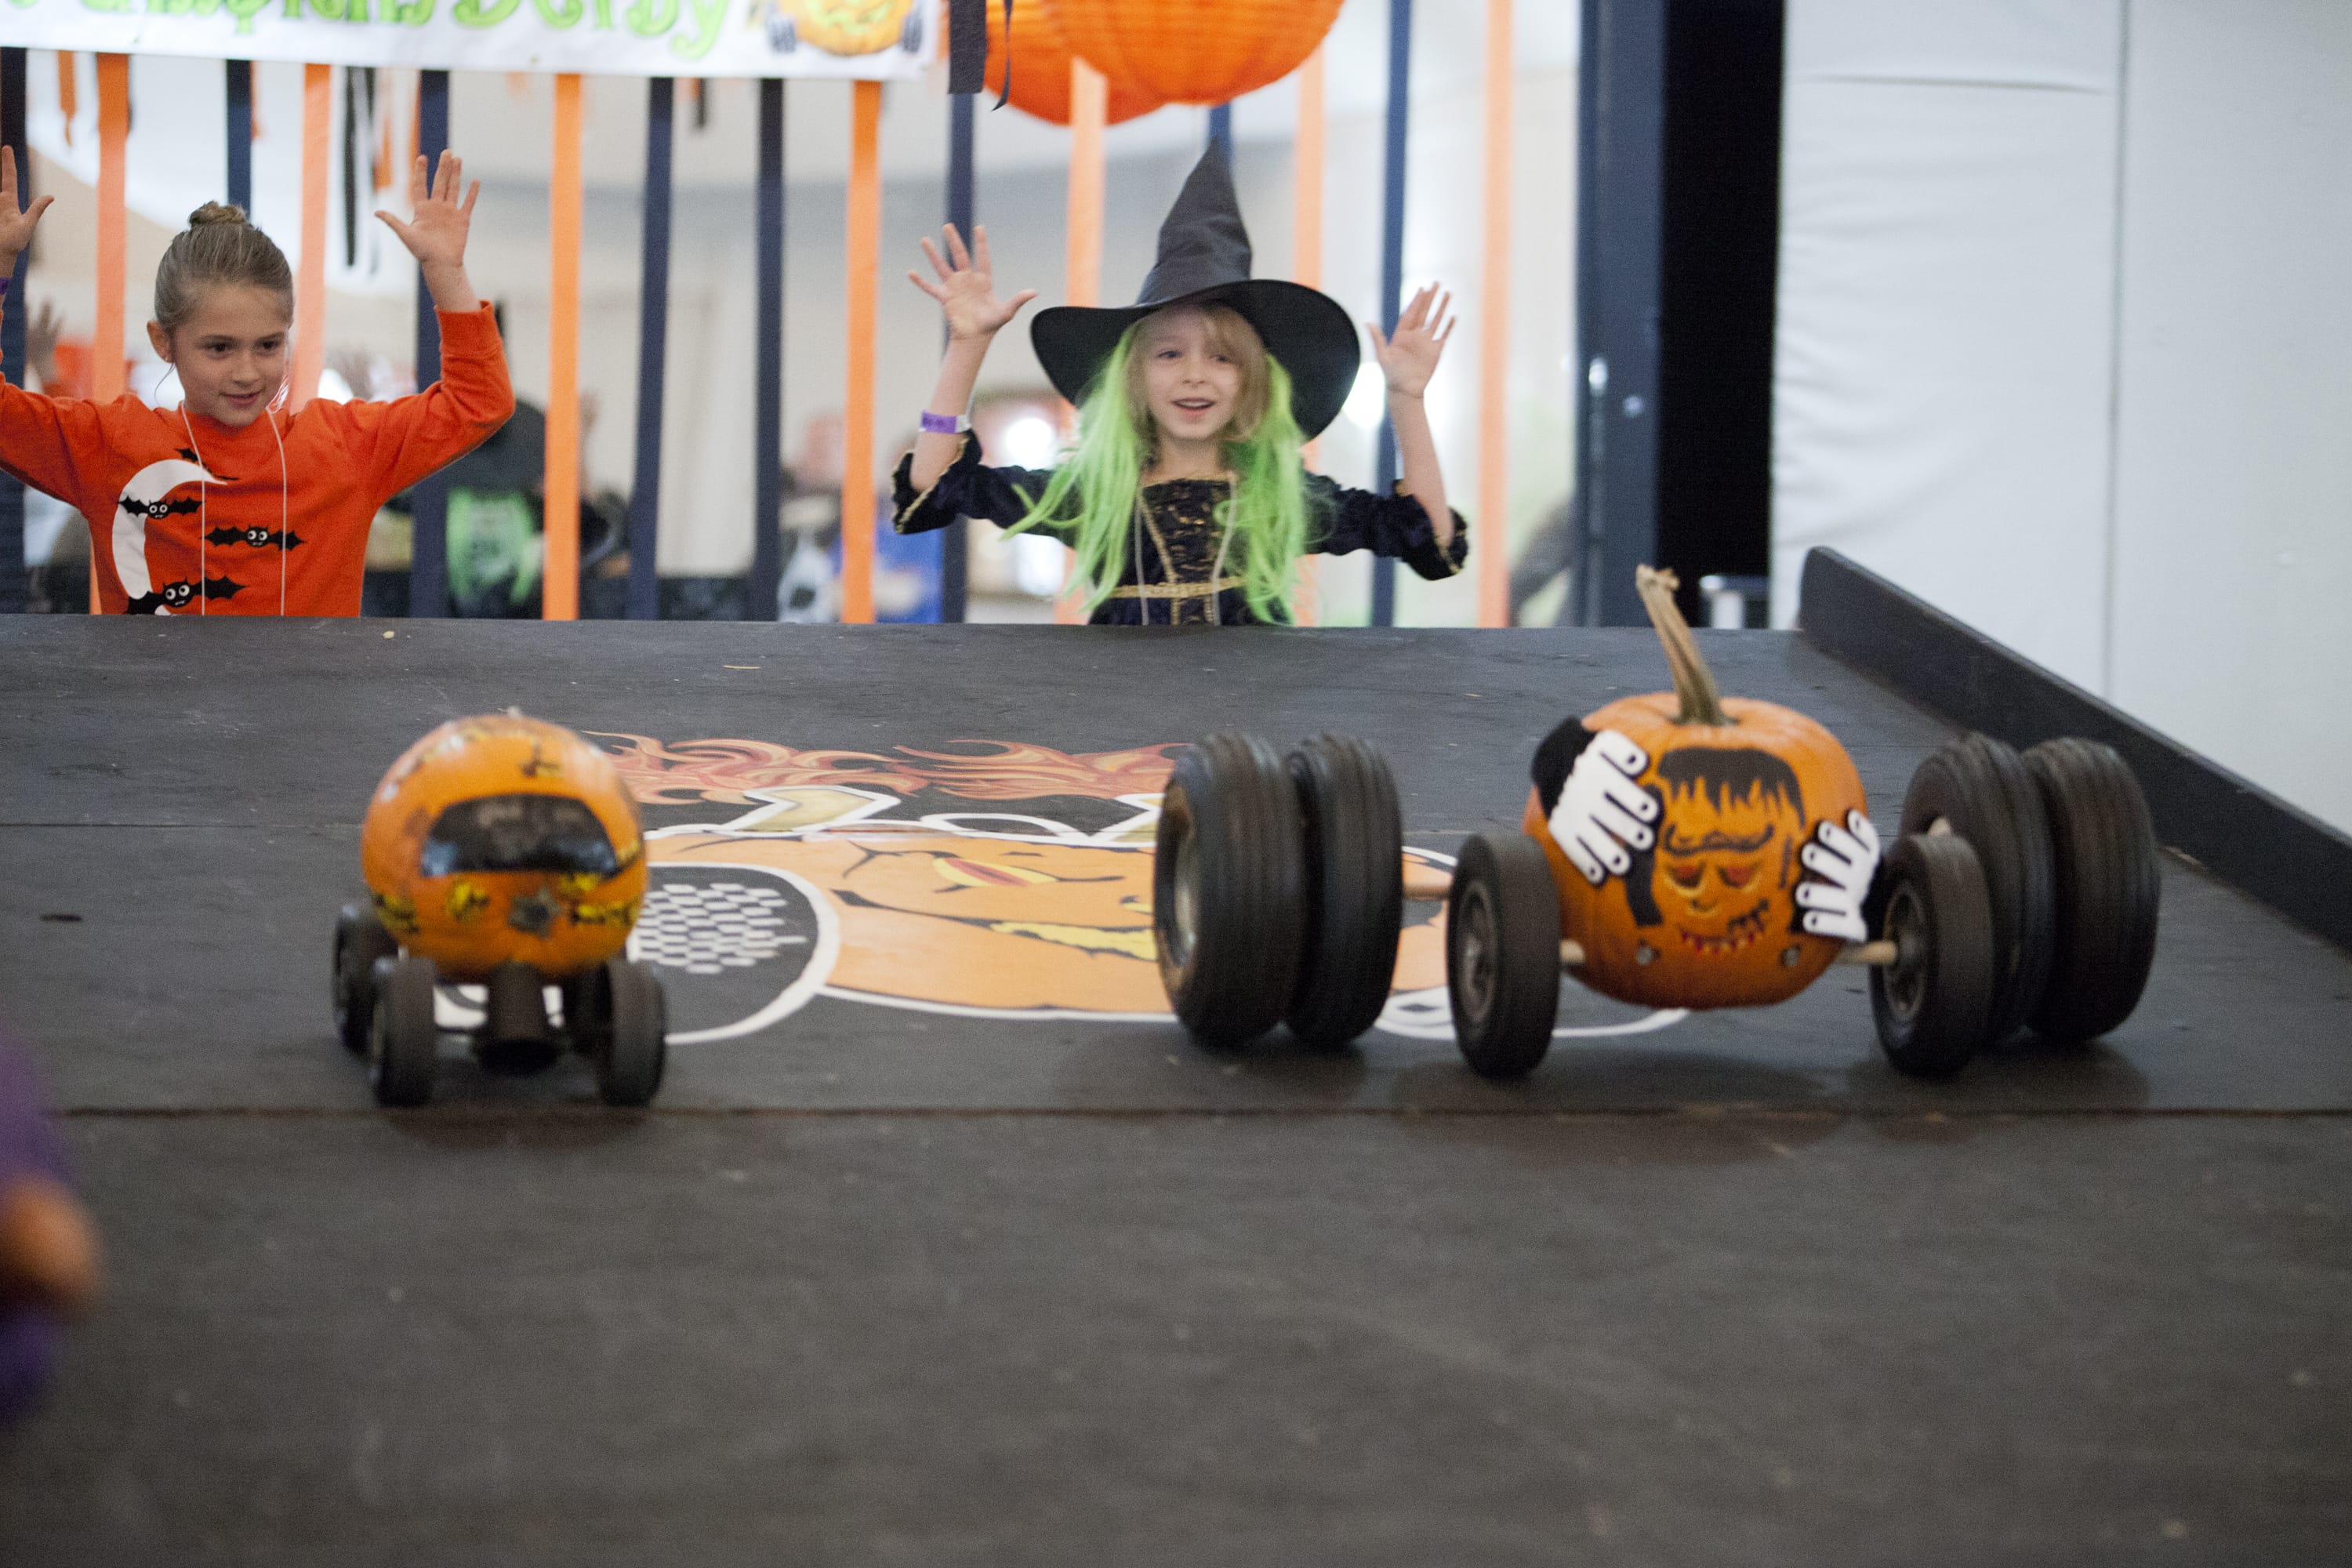 Photos by Vivian Johnson for The Columbian
Callie Kahler, right, races her Freaky Frankie Frank pumpkin at the Screaming Pumpkin Derby at Serendipity's Event Center.   Below, beyond pumpkin racing, the Screaming Pumpkin Derby also included several kids activities and a costume contest.